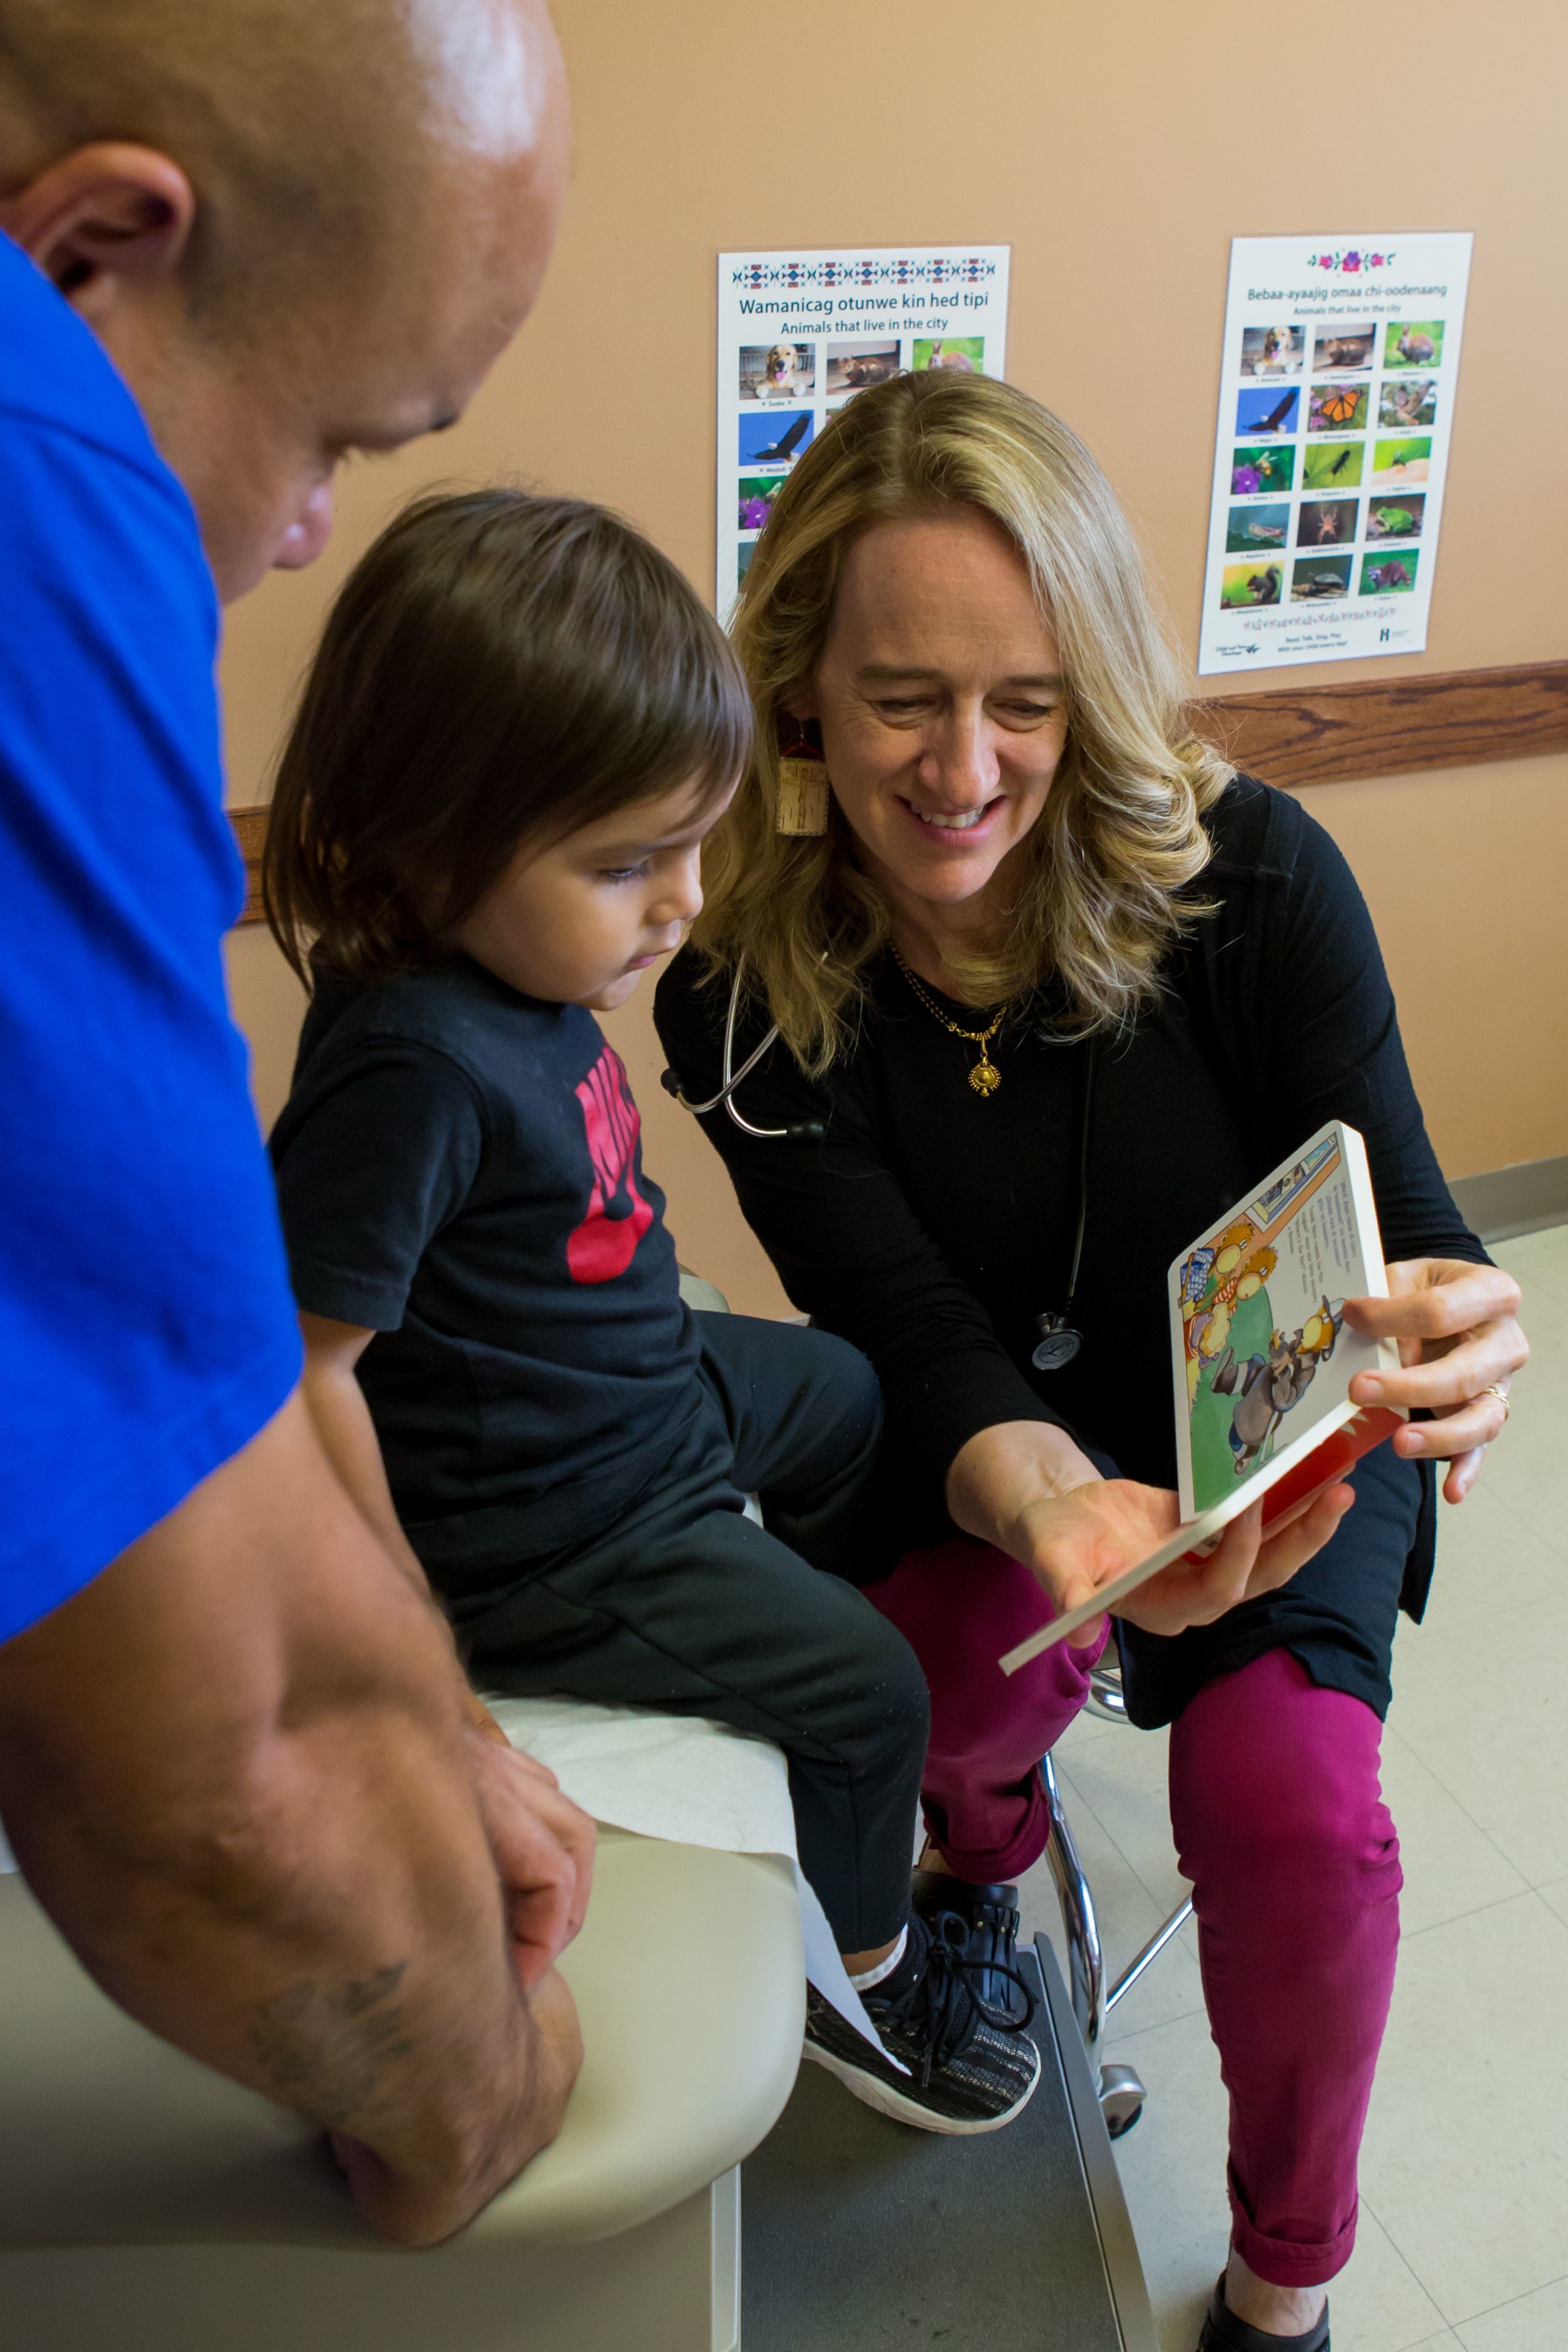 Dr. Erdrich shares book with toddler boy and father